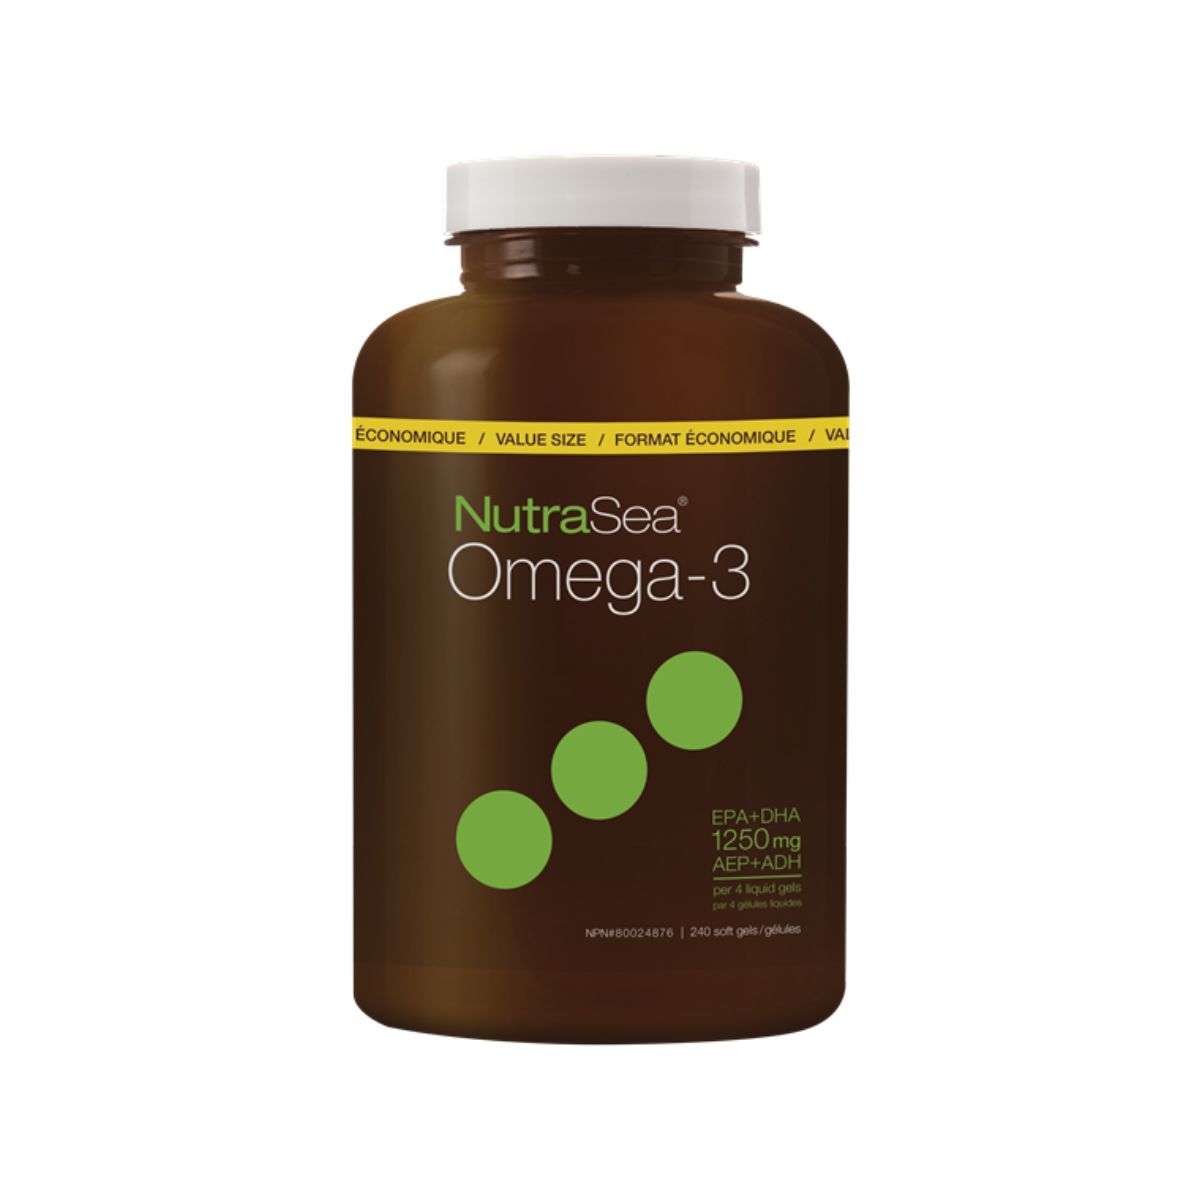 Nutra Sea Omega-3 1250mg Lemon Flavour 240 Soft gels product image - Omega-3 supplement in a brown and green bottle.